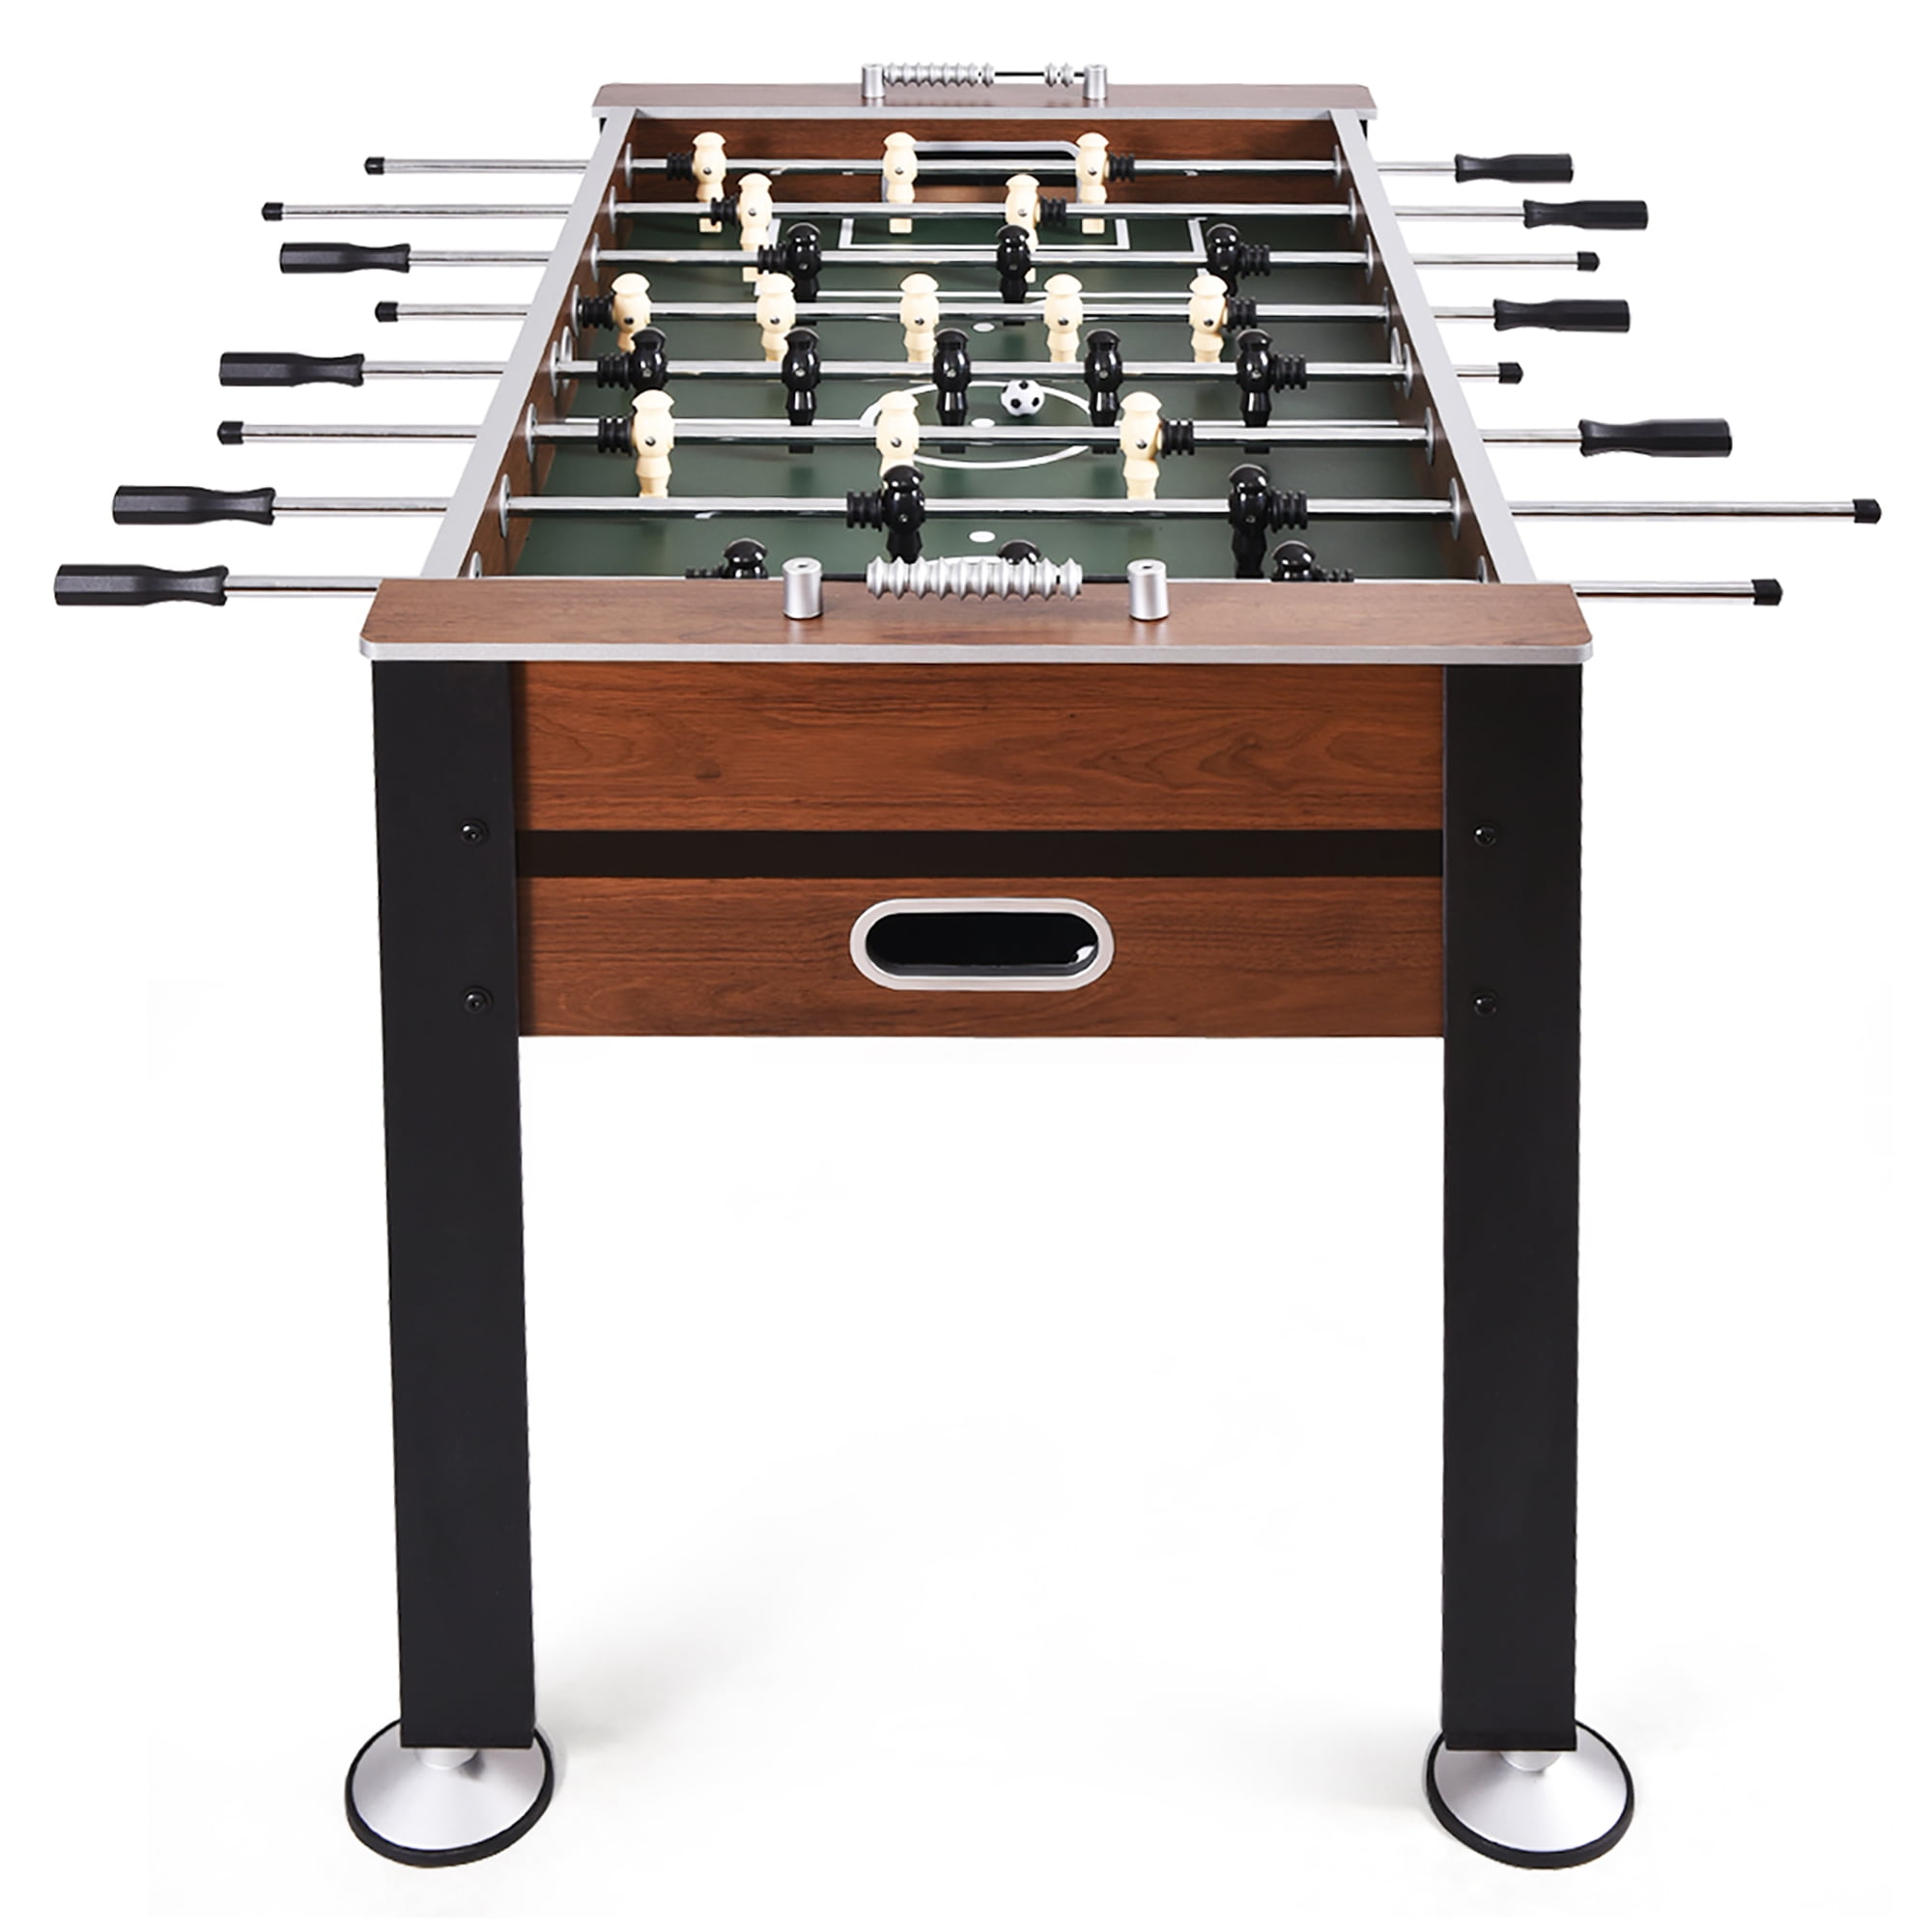 NEW 54" Foosball Soccer Table Competition Sized Football Arcade Indoor Game Room 